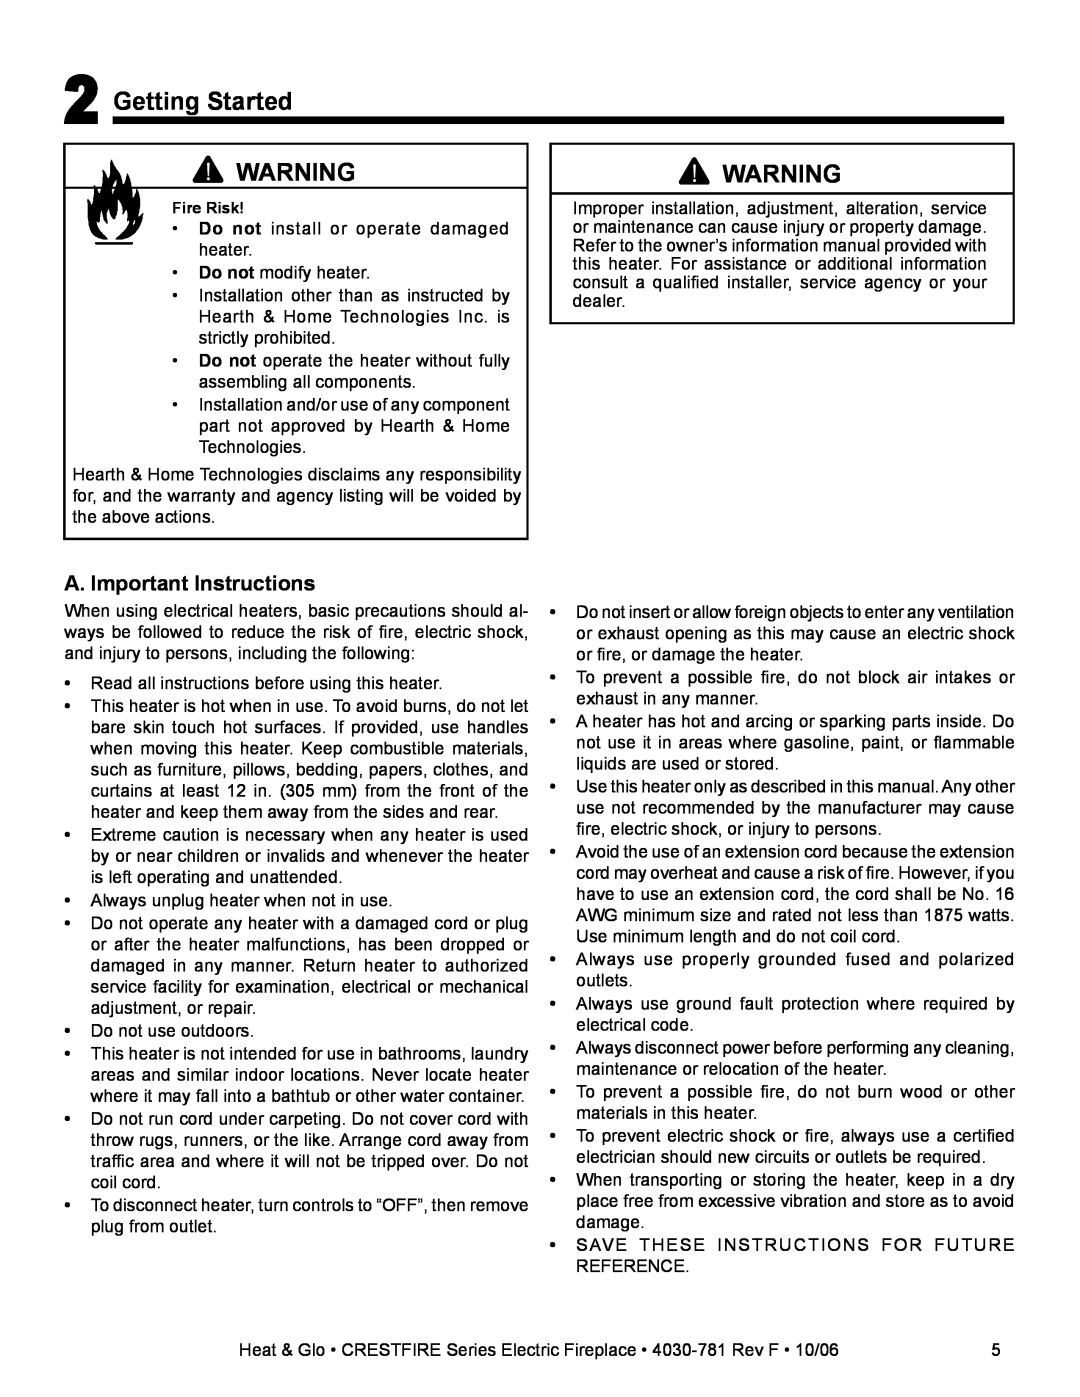 Heat & Glo LifeStyle CF550E-B owner manual Getting Started, A. Important Instructions 